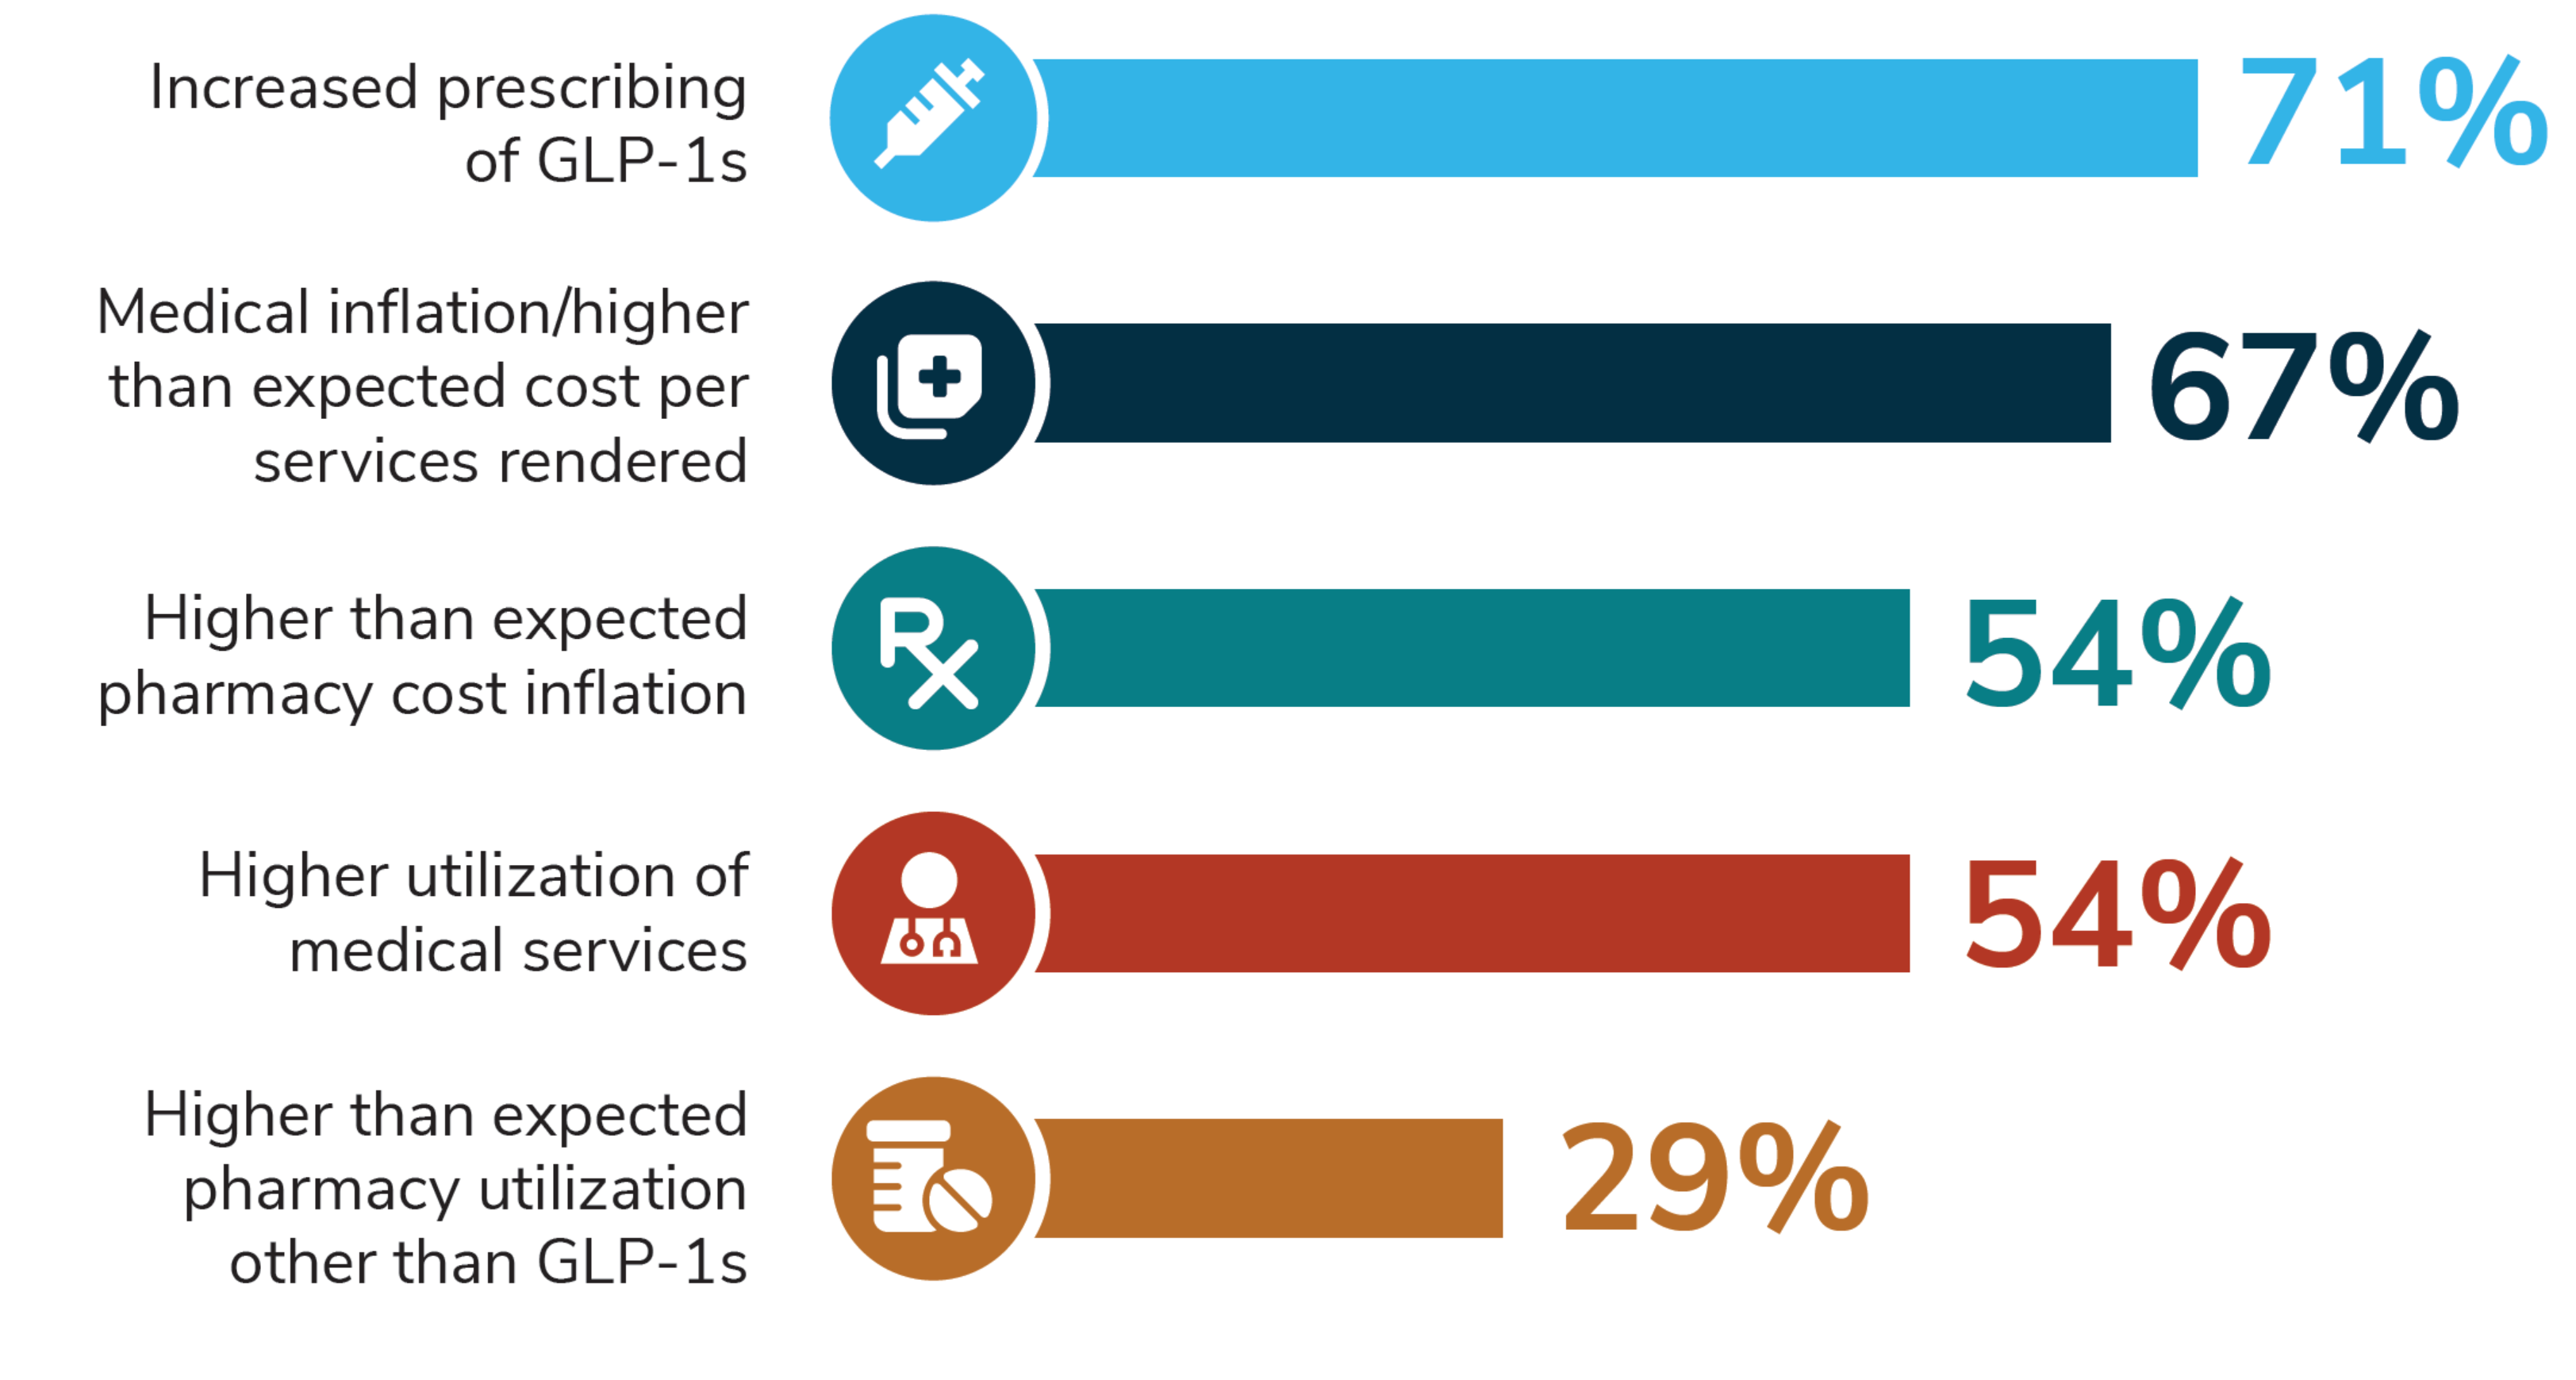 71% Increased prescribing of GLP-1s. 67% Medical inflation/higher than expected cost per services rendered. 54% Higher than expected pharmacy cost inflation. 54% Higher utilization of medical services. 29% Higher than expected pharmacy utilization other than GLP-1s